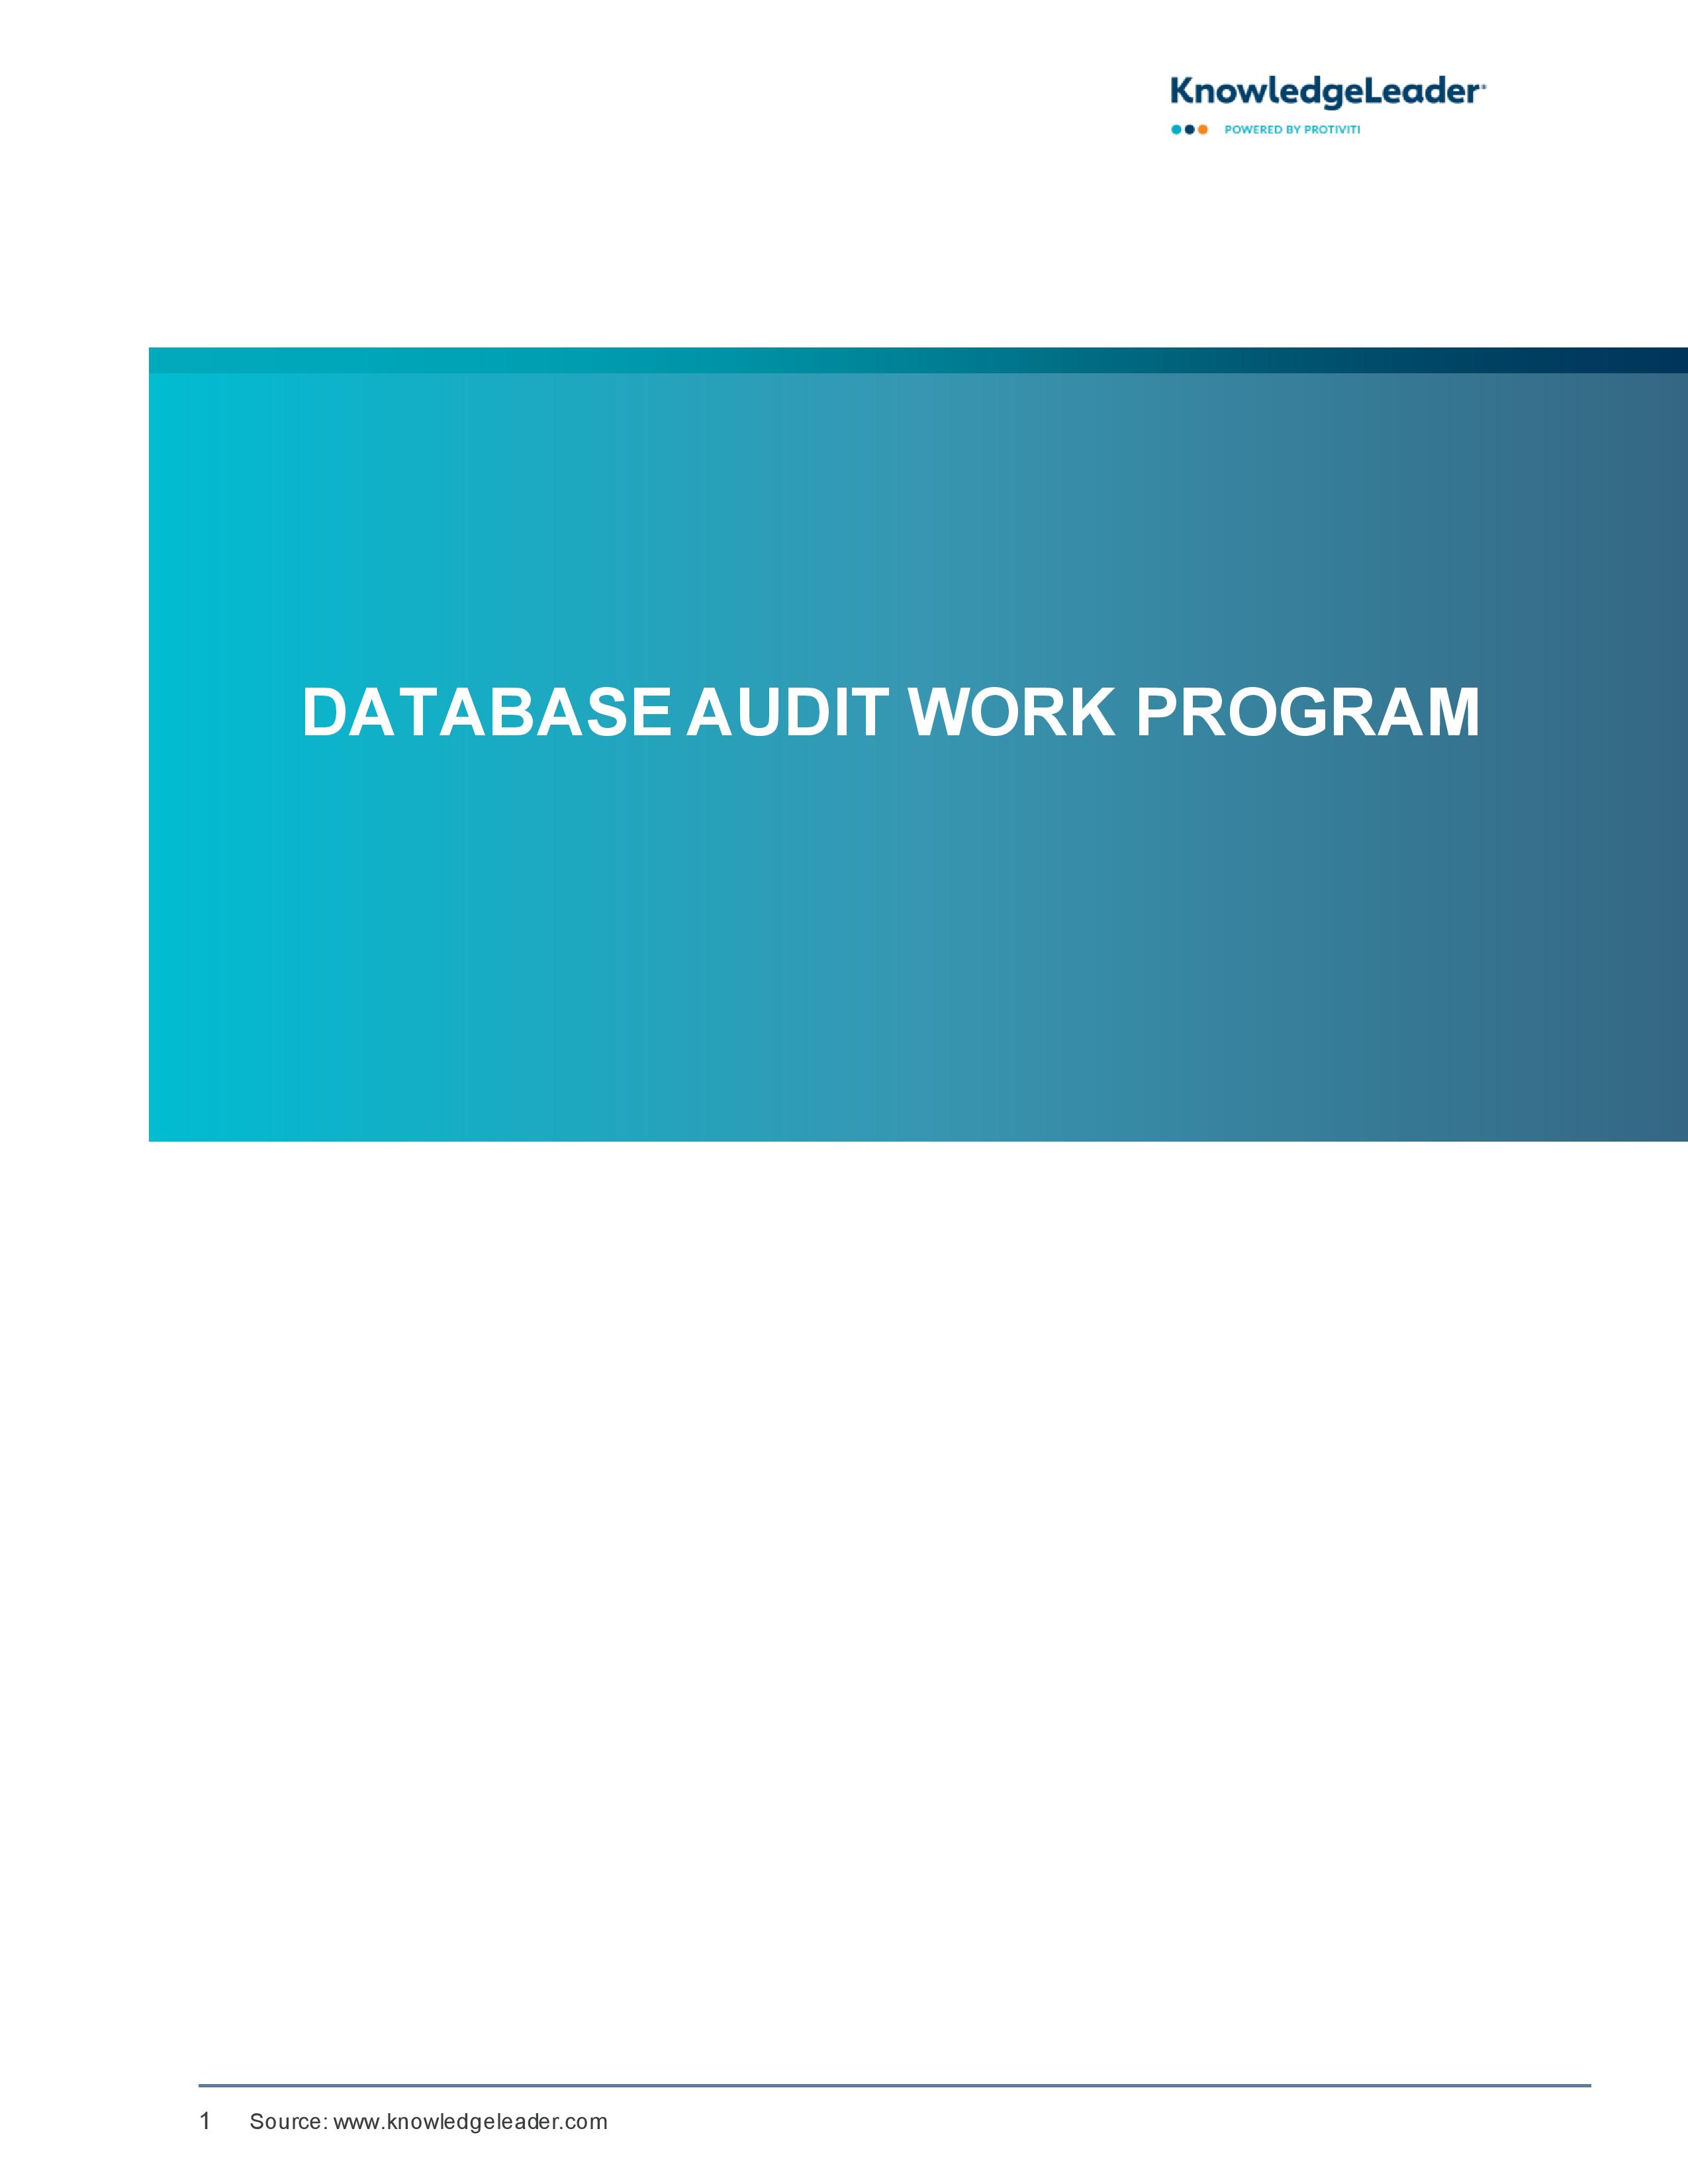 Screenshot of the first page of Database Audit Work Program